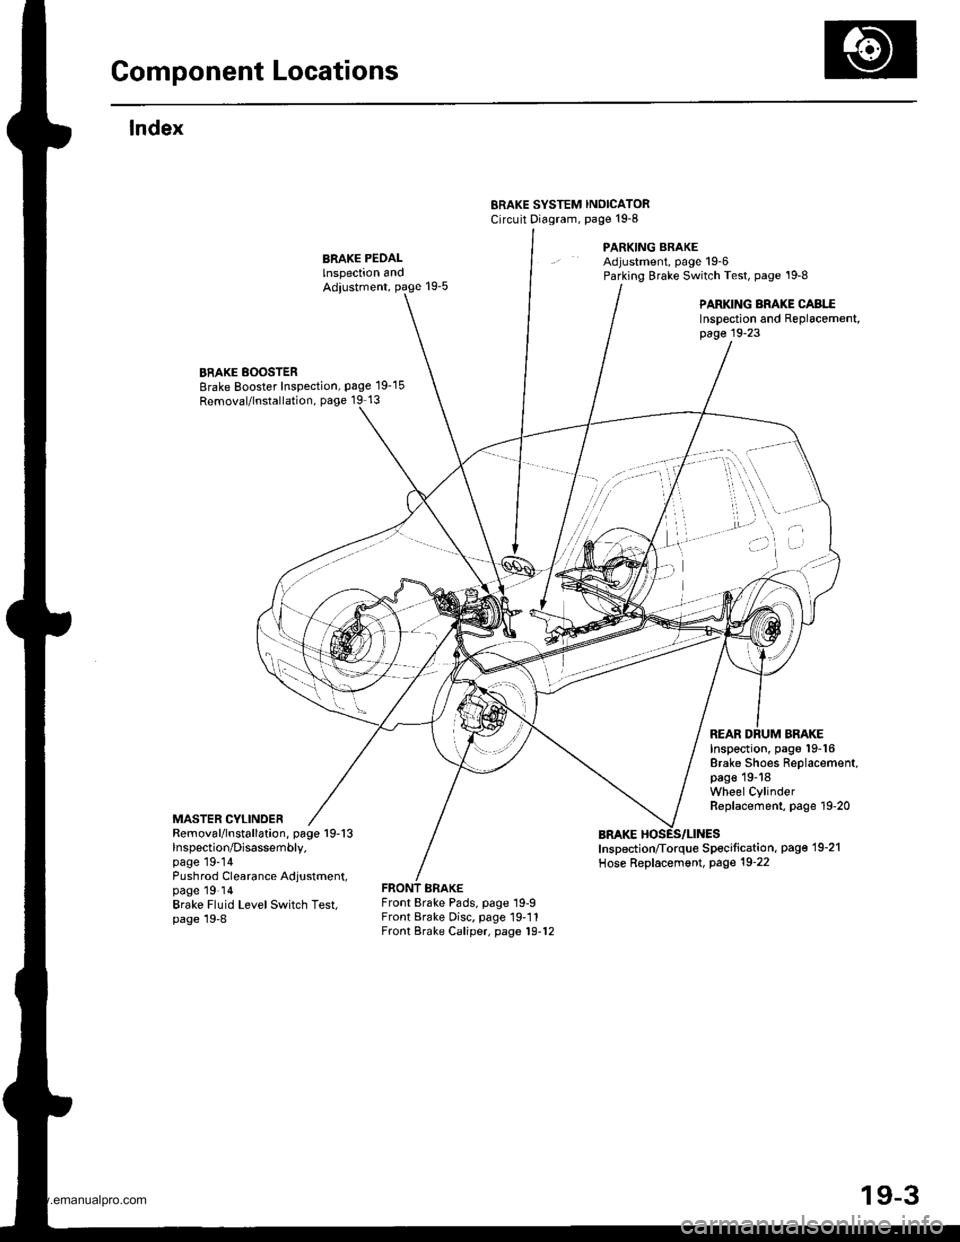 HONDA CR-V 2000 RD1-RD3 / 1.G Owners Guide 
Gomponent Locations
lndex
ERAKE SYSTEM INOICATORCircuit Diagram, paget9-8
PARKING BRAKEAdjustment, page 19-6Parking Brake Switch Test, page 19-8
PARKING BRAKE CABI..EInspection and Replacement,page